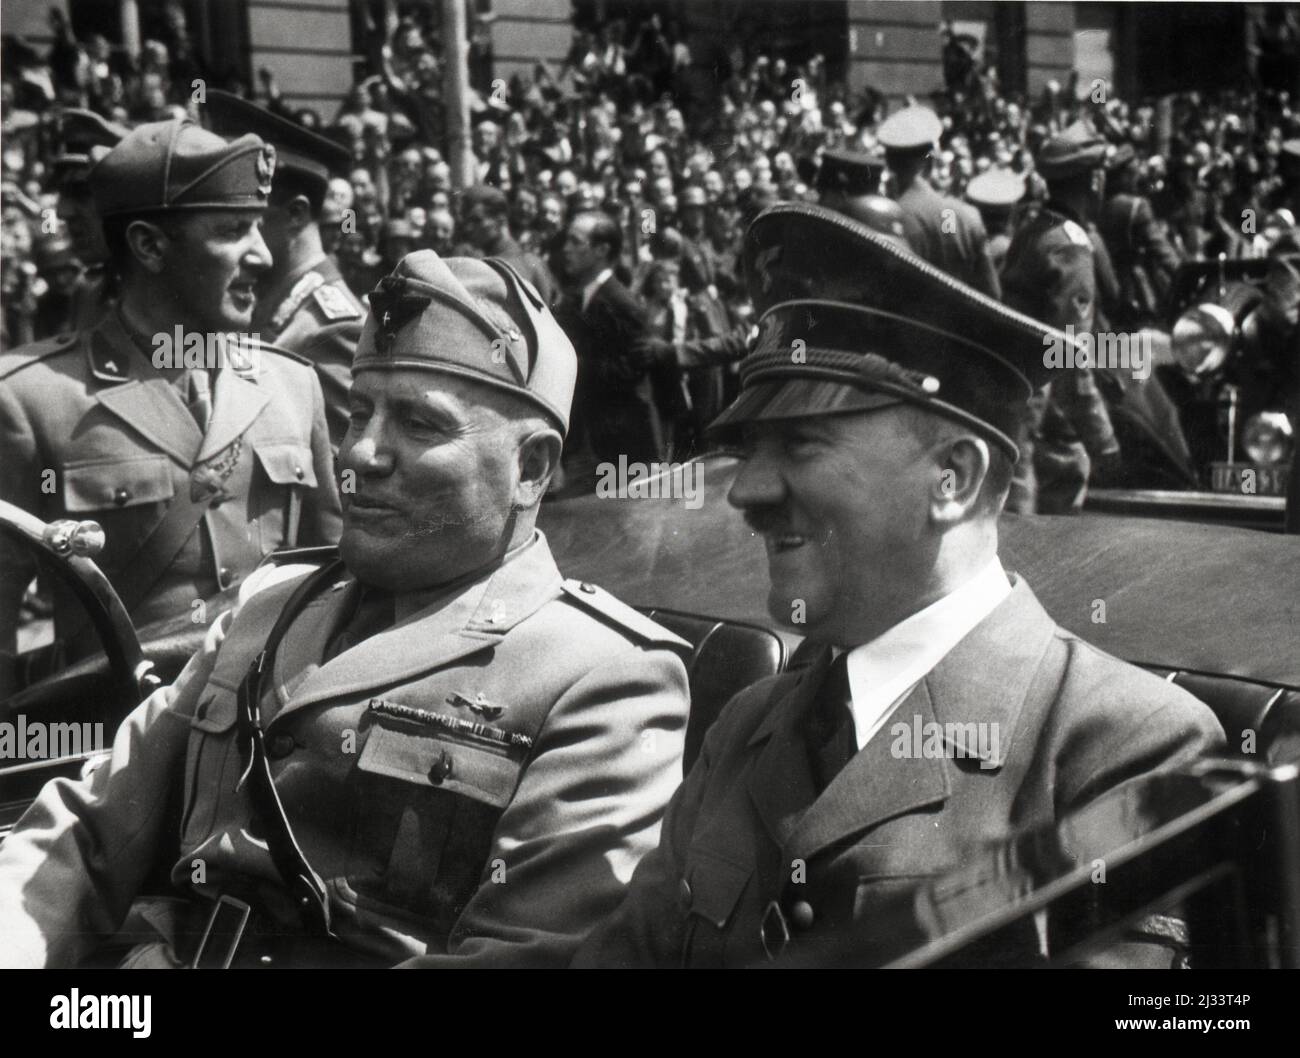 Adolf Hitler and Benito Mussolini in Munich, Germany Eva Braun's Photo Albums, ca. 1913 - ca. 1944. These albums are attributed to Eva Braun (four are claimed by her friend Herta Schneider, nee Ostermeyer) and document her life from ca. 1913 to 1944. There are many photographs of Eva, her sisters and their children, Herta Schneider and her children, as well as photographs of Eva's vacations, family members and friends. Included also are photographs taken by and of Eva Braun at Hitler's chalet Berghof (or Kehlstein), photographs of Hitler and his entourage, visitors to Berghof and the scenery a Stock Photo